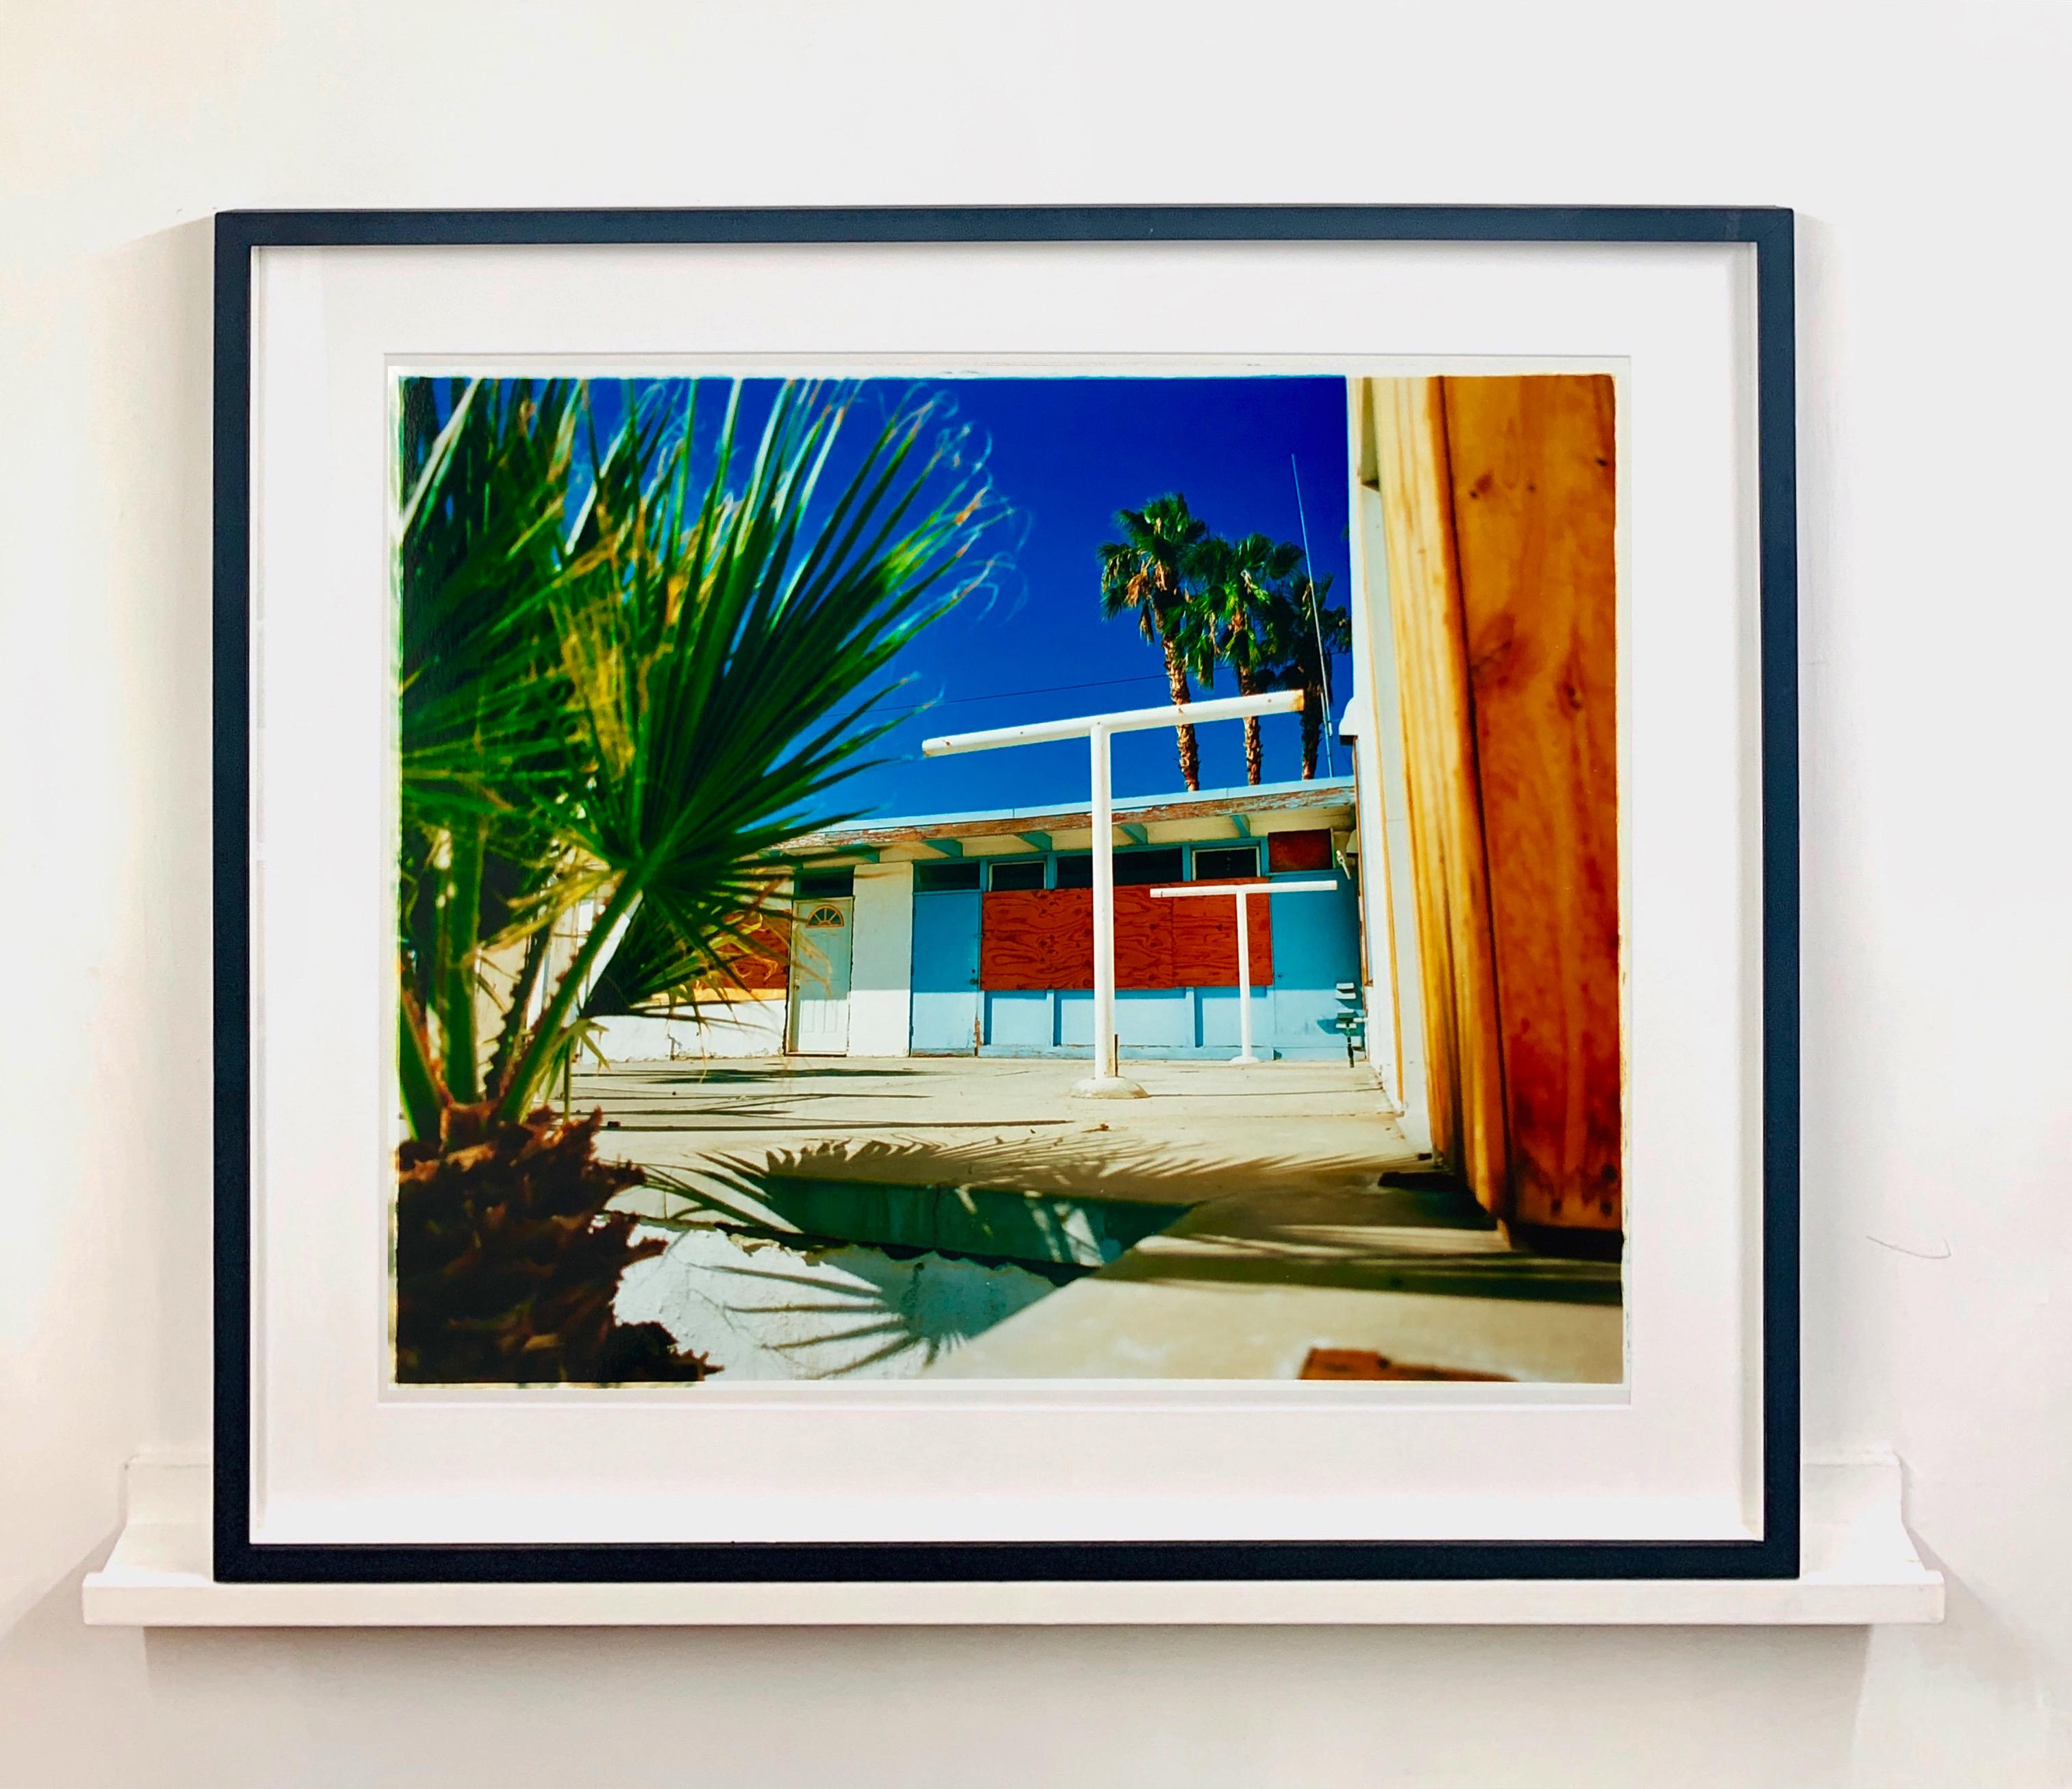 Part of Richard Heeps 'Dream in Colour' Series, this picture has the a vibe of a Southern California American road trip, the colours are so seductive, the palm trees create a desert oasis amongst mid 20th Century architecture. The light is so clear,